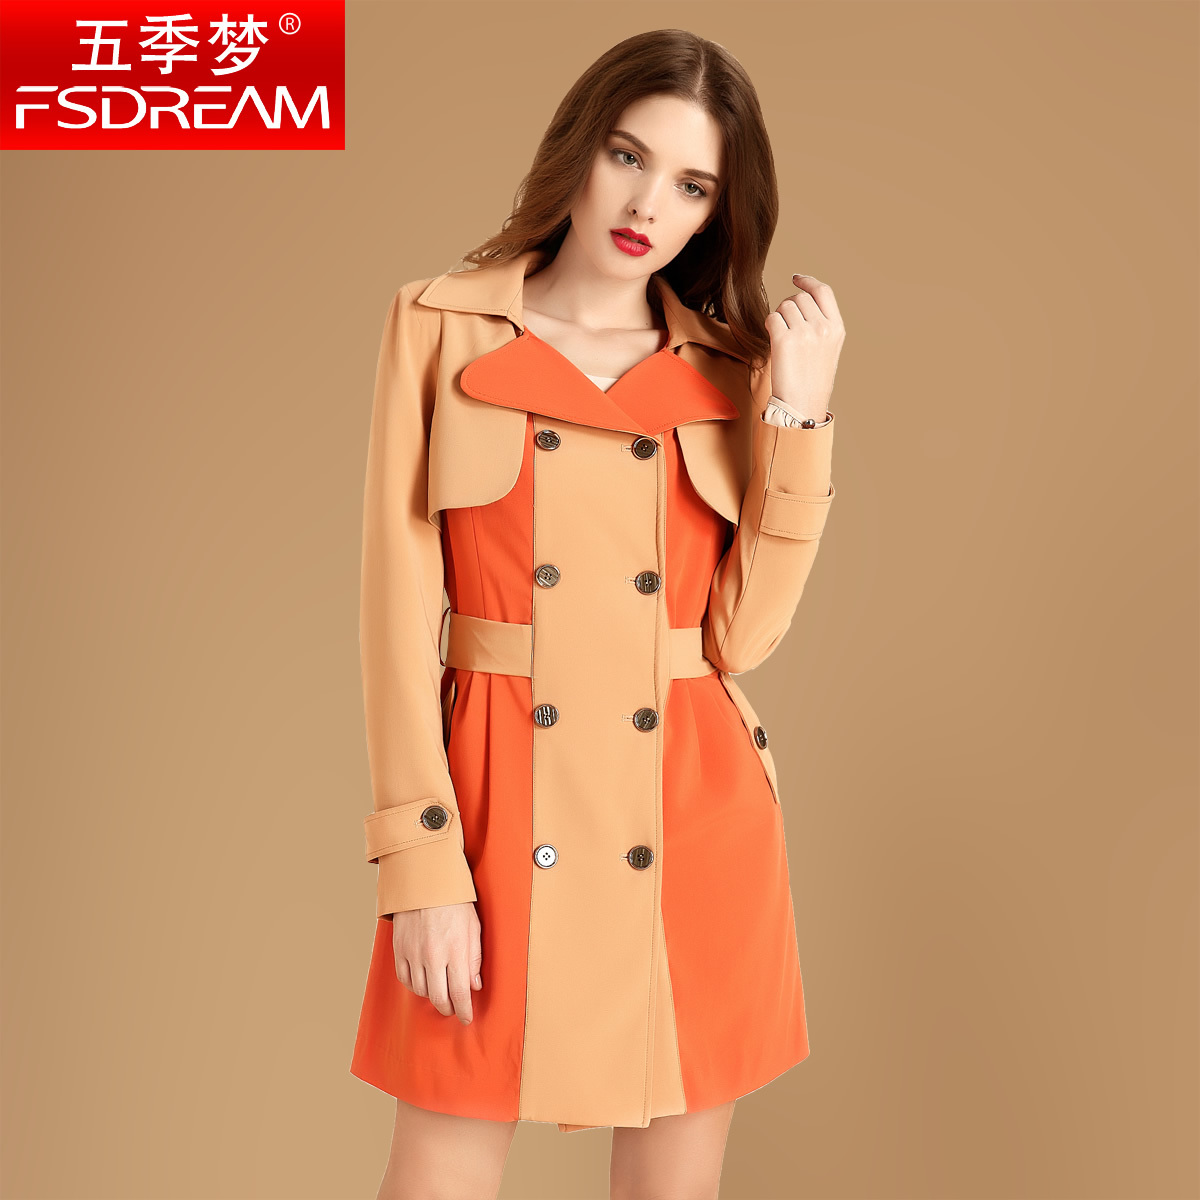 Free Shipping Dream 2012 autumn double breasted long-sleeve turn-down collar long design slim trench w12507